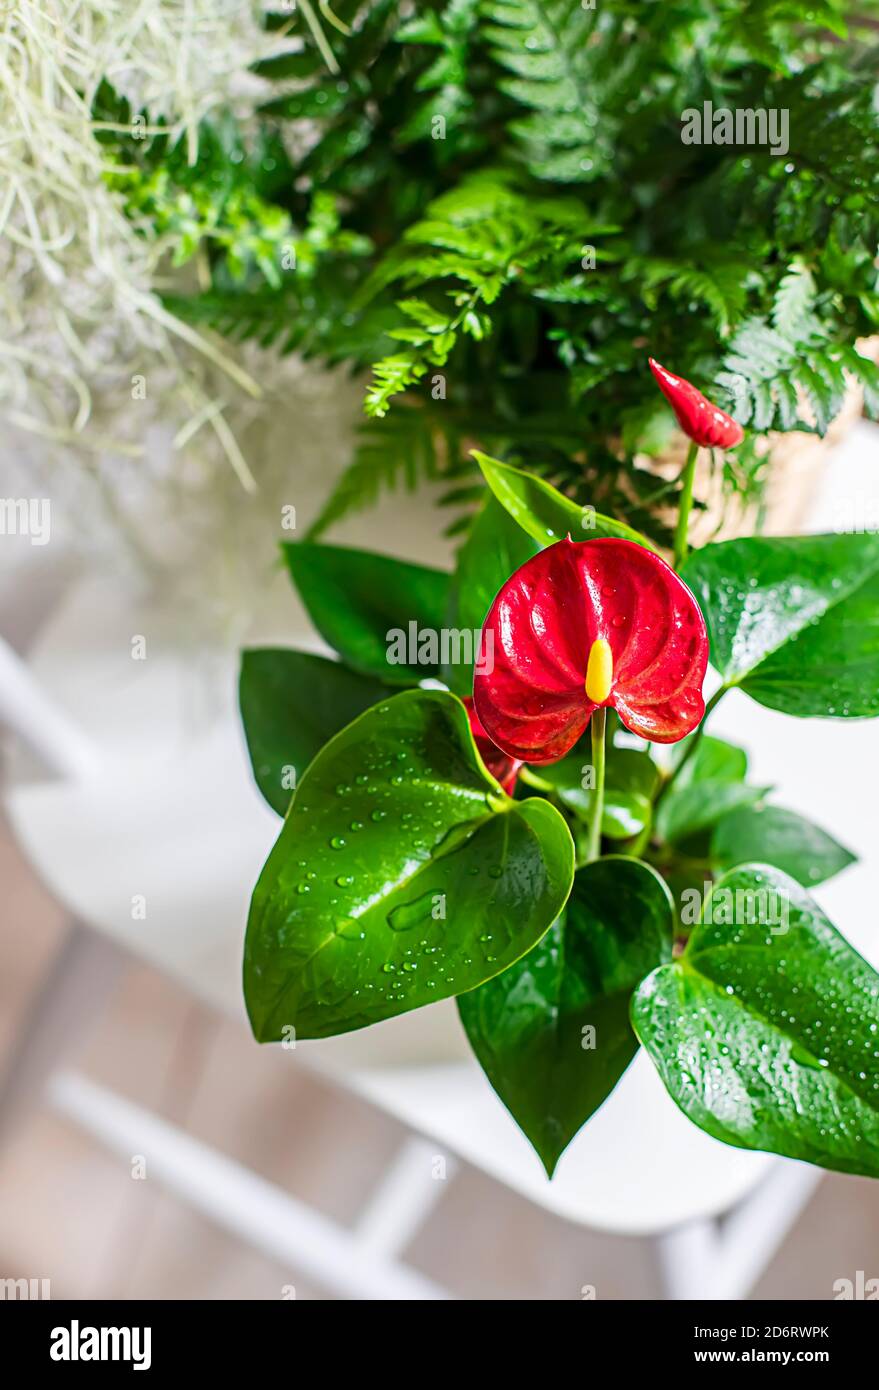 House plant red Anthurium in a pot on a wooden table. Anthurium andreanum. Flower Flamingo flowers or Anthurium andraeanum symbolize hospitality Stock Photo